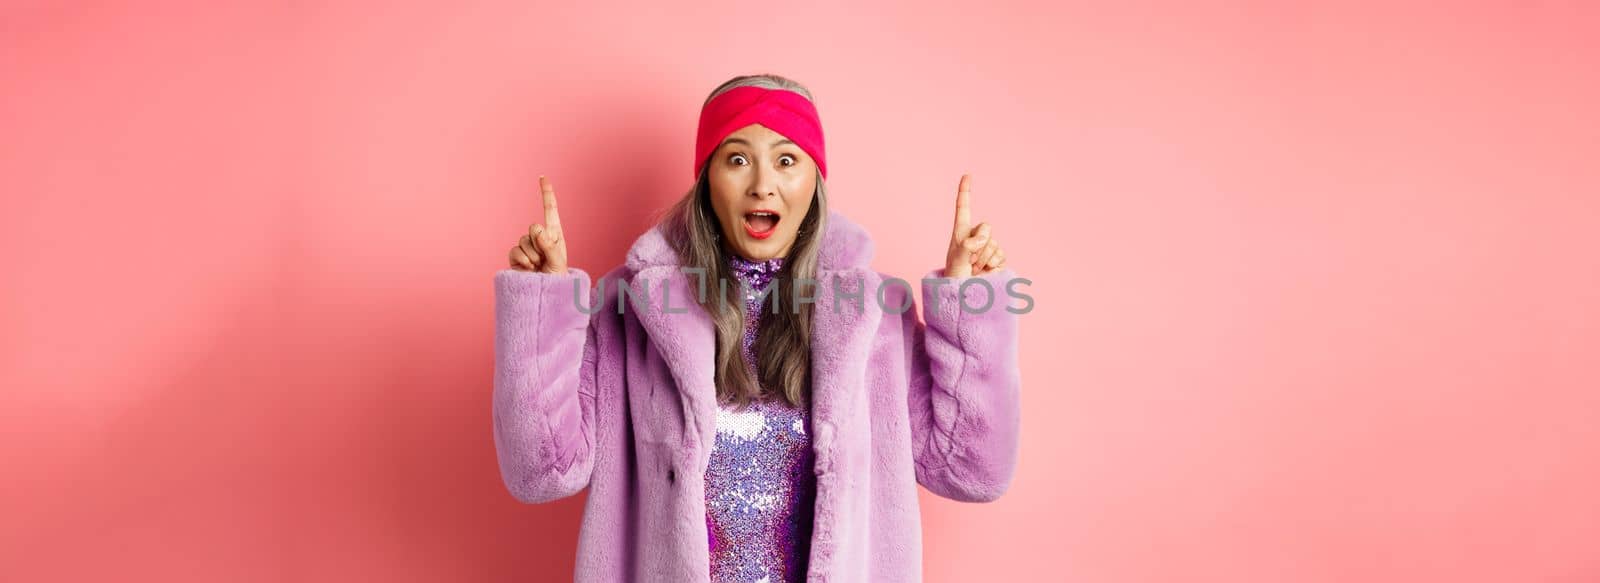 Happy elderly asian lady pointing fingers up, looking amazed at camera, showing cool promo offer, standing against pink background in purple fake fur coat.